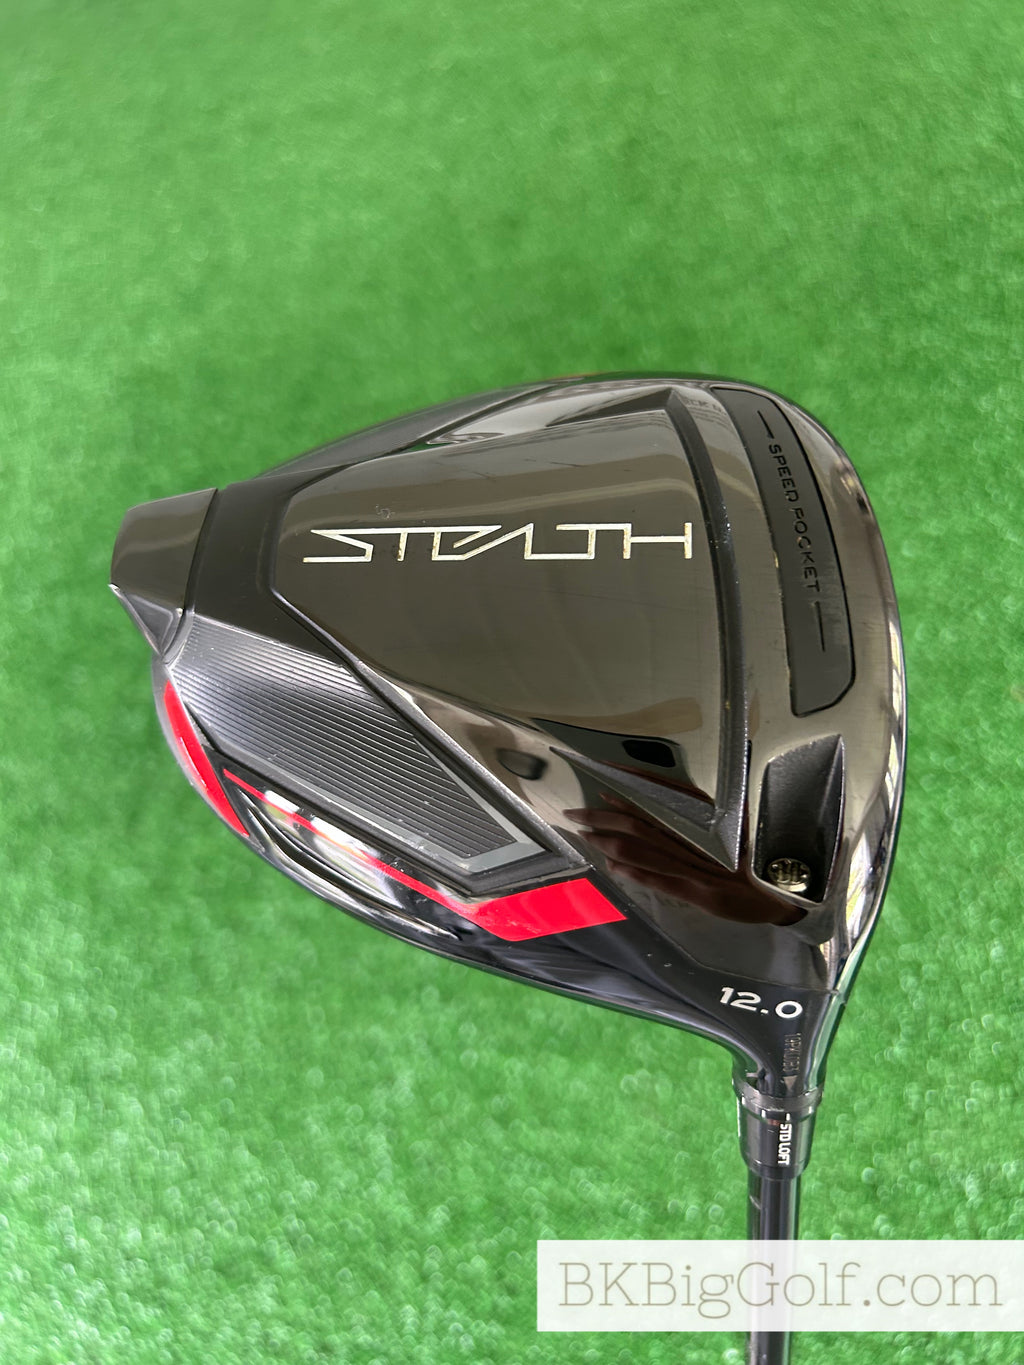 Taylormade Stealth 12.0 Driver / Regular